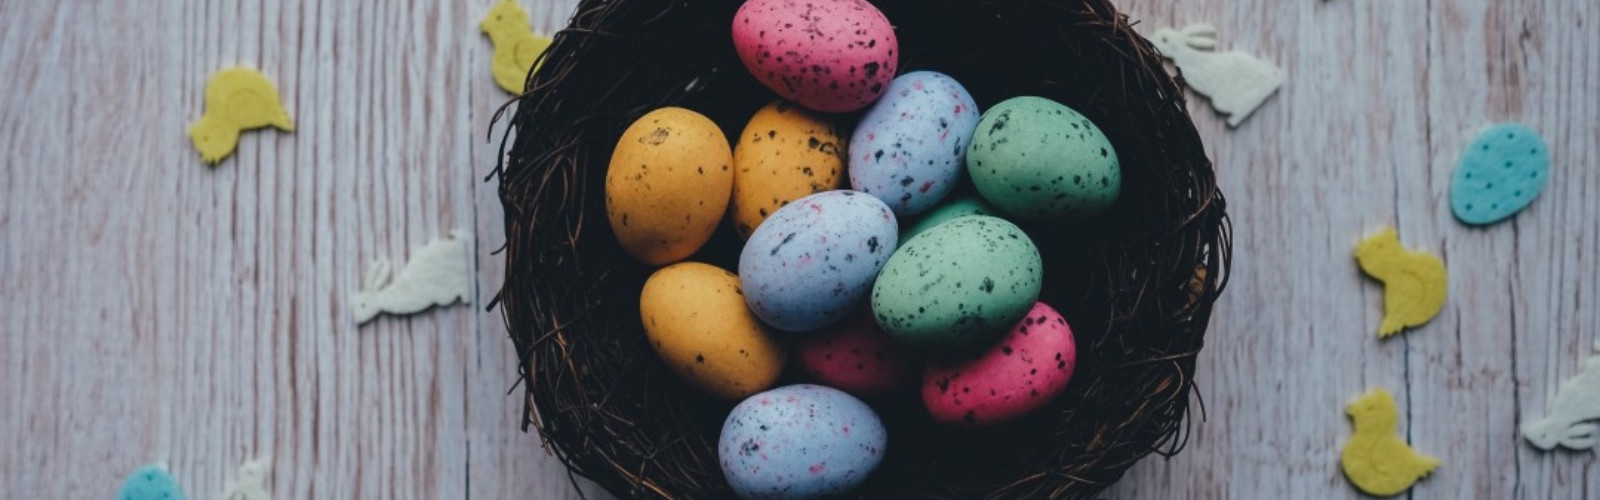 4 Easter Employee Engagement Ideas For Your Office